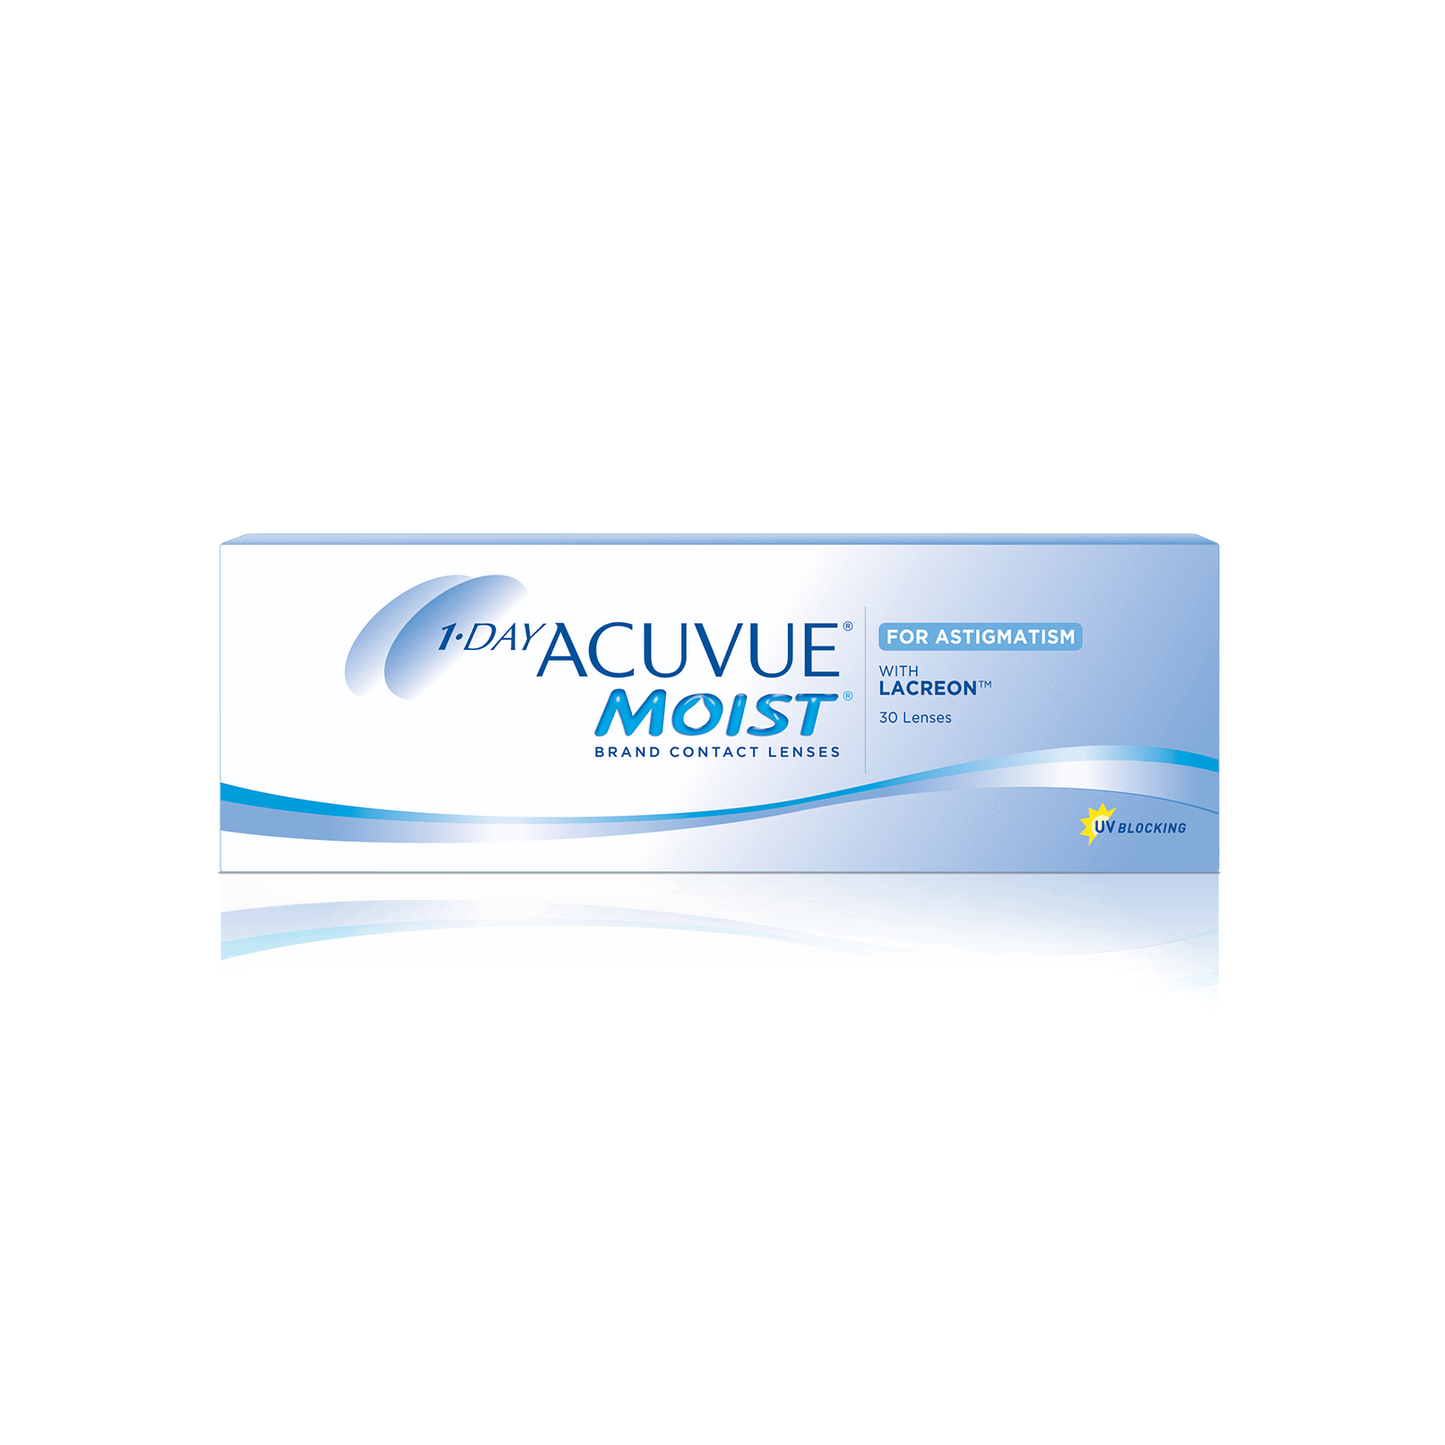 1-Day ACUVUE® MOIST for ASTIGMATISM